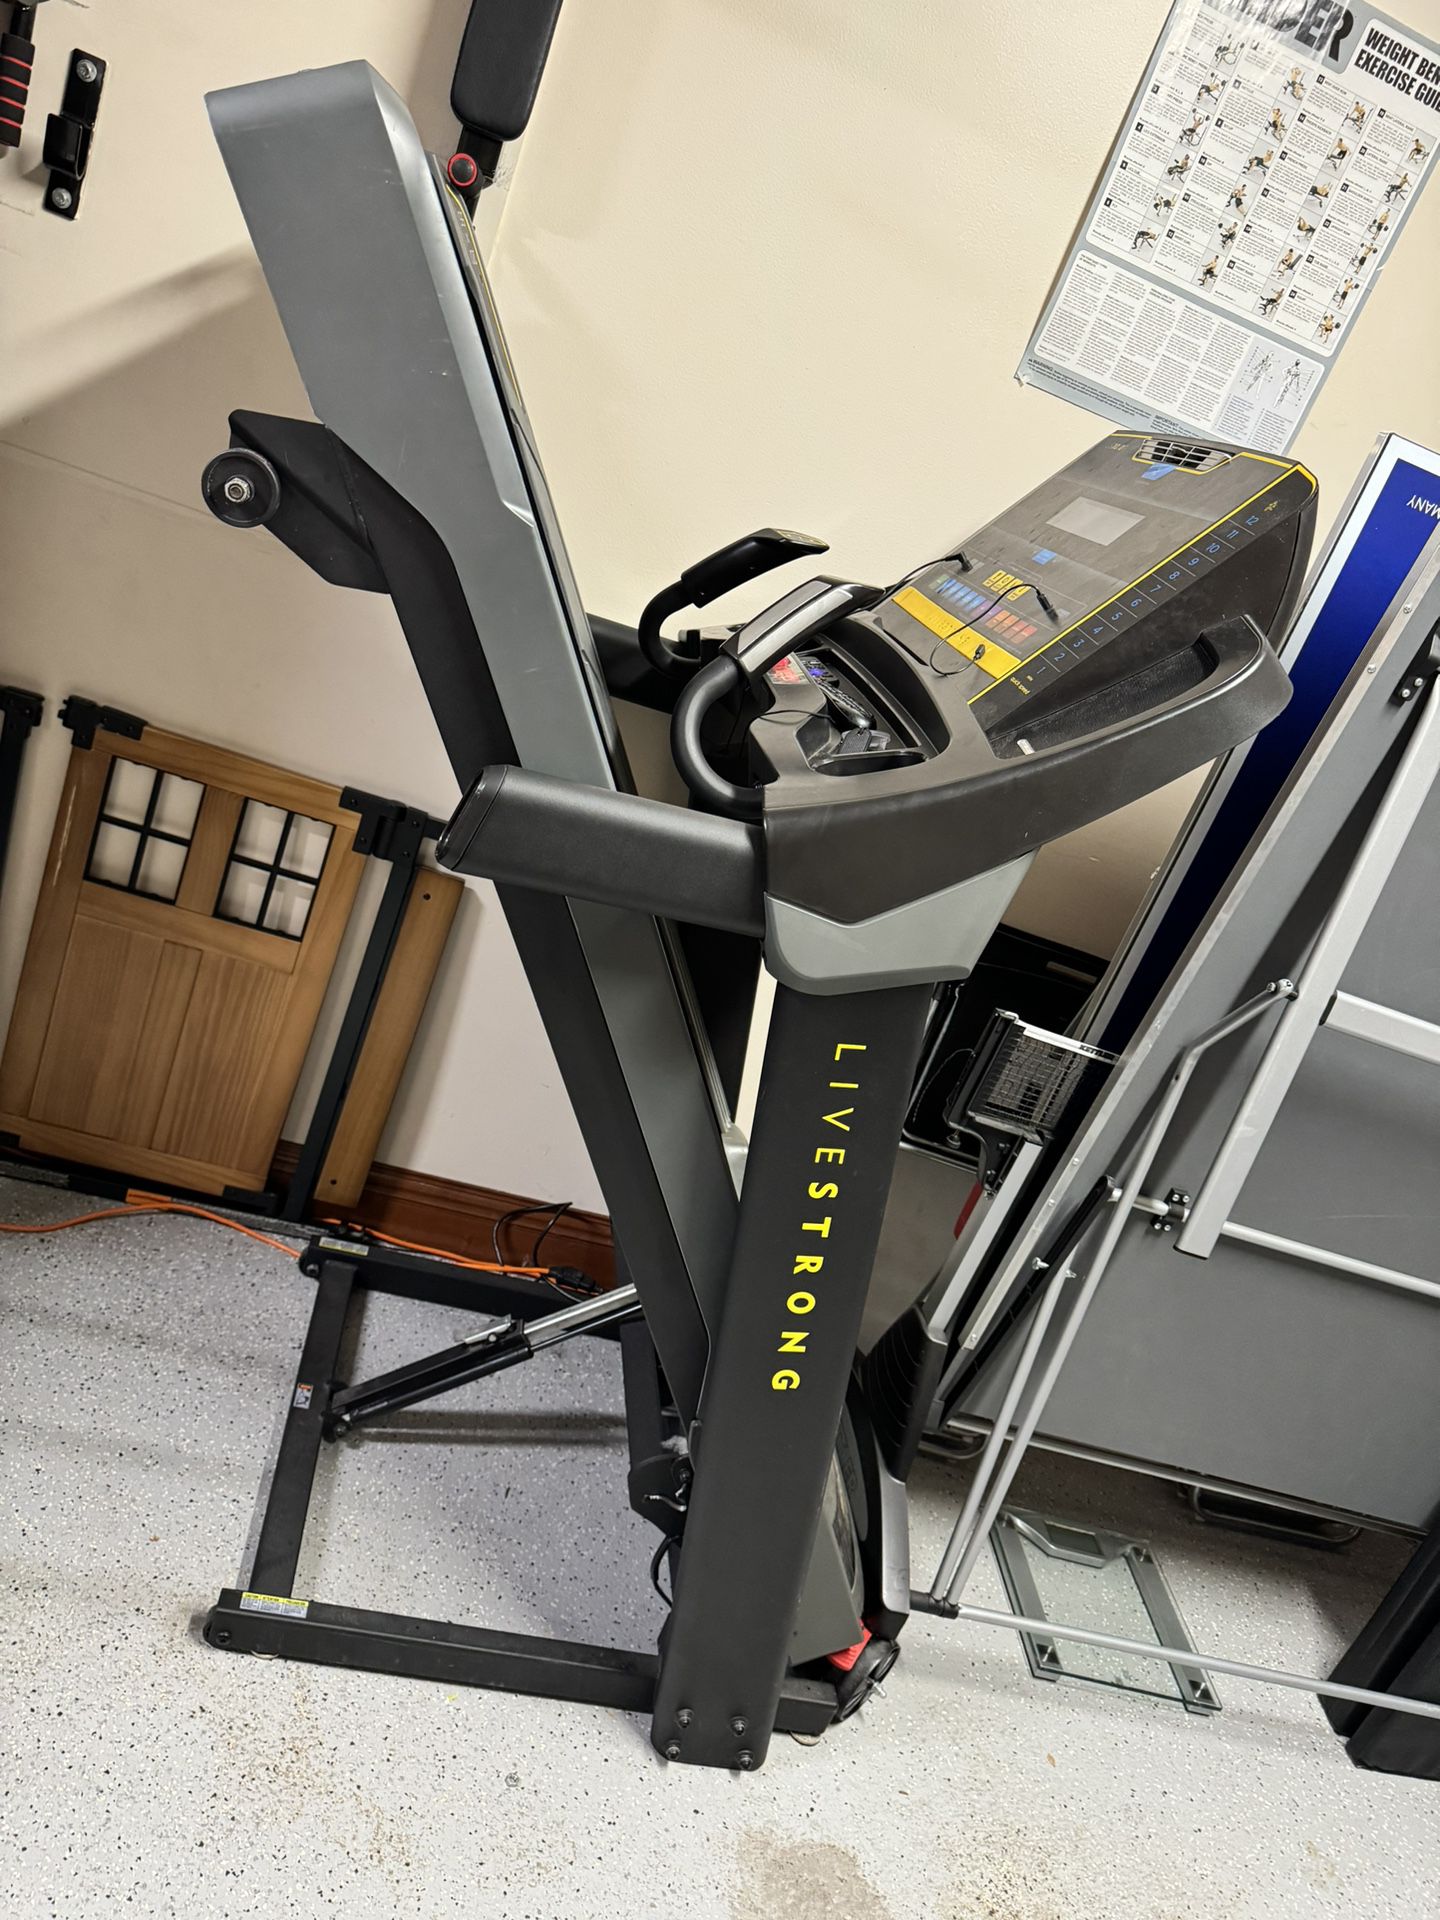 Livestrong Treadmill In Good Condition, Built-in Speaker And Fan